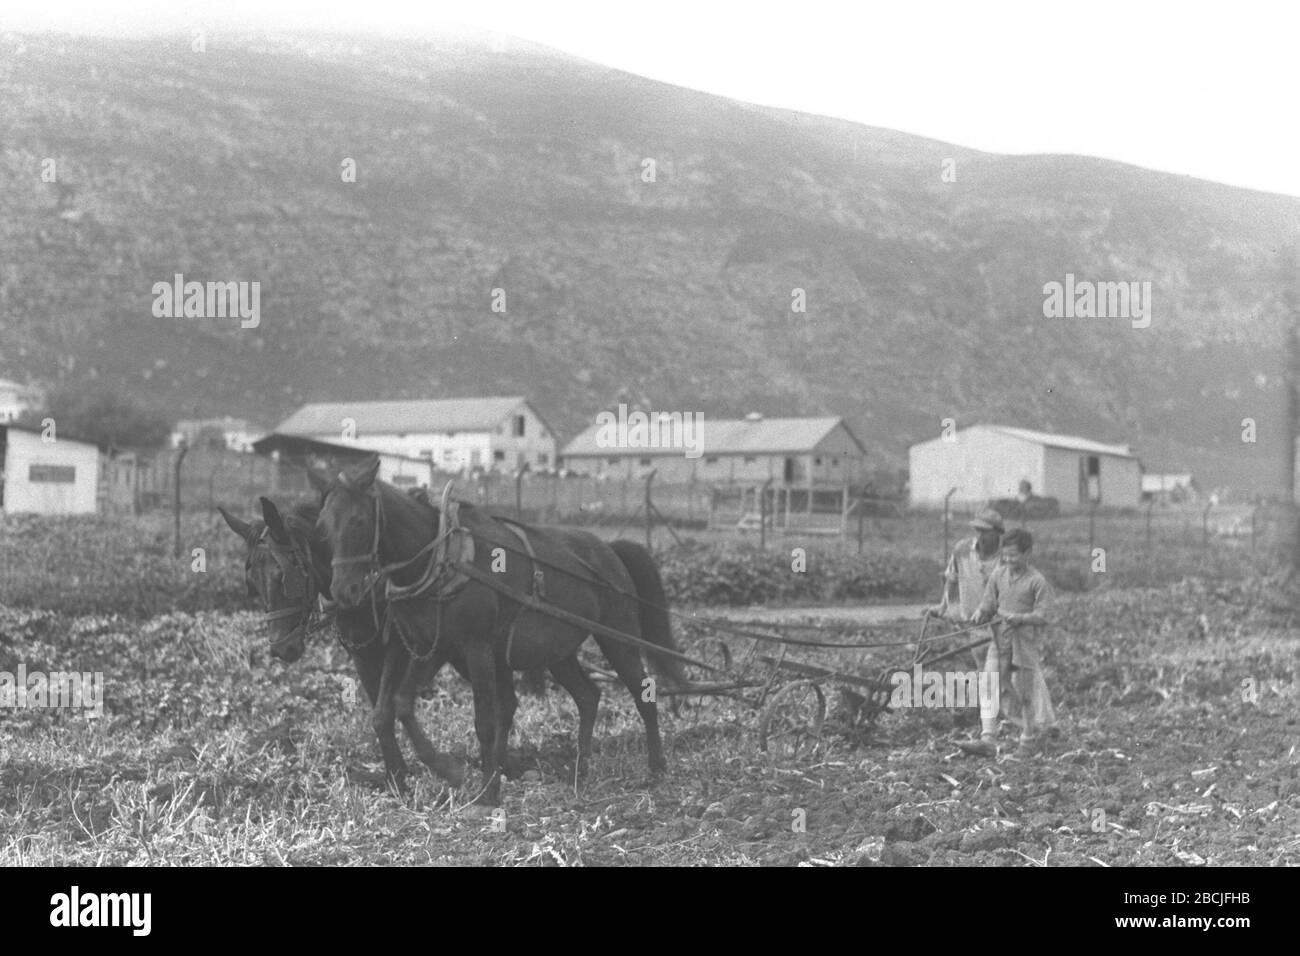 English Kibbutz Members Ploughing A Field At Beit Alfa O U I O U O E O Ss O E I E O E U E O I C O U E C I I 30 March 1937 This Is Available From National Photo Collection Of Israel